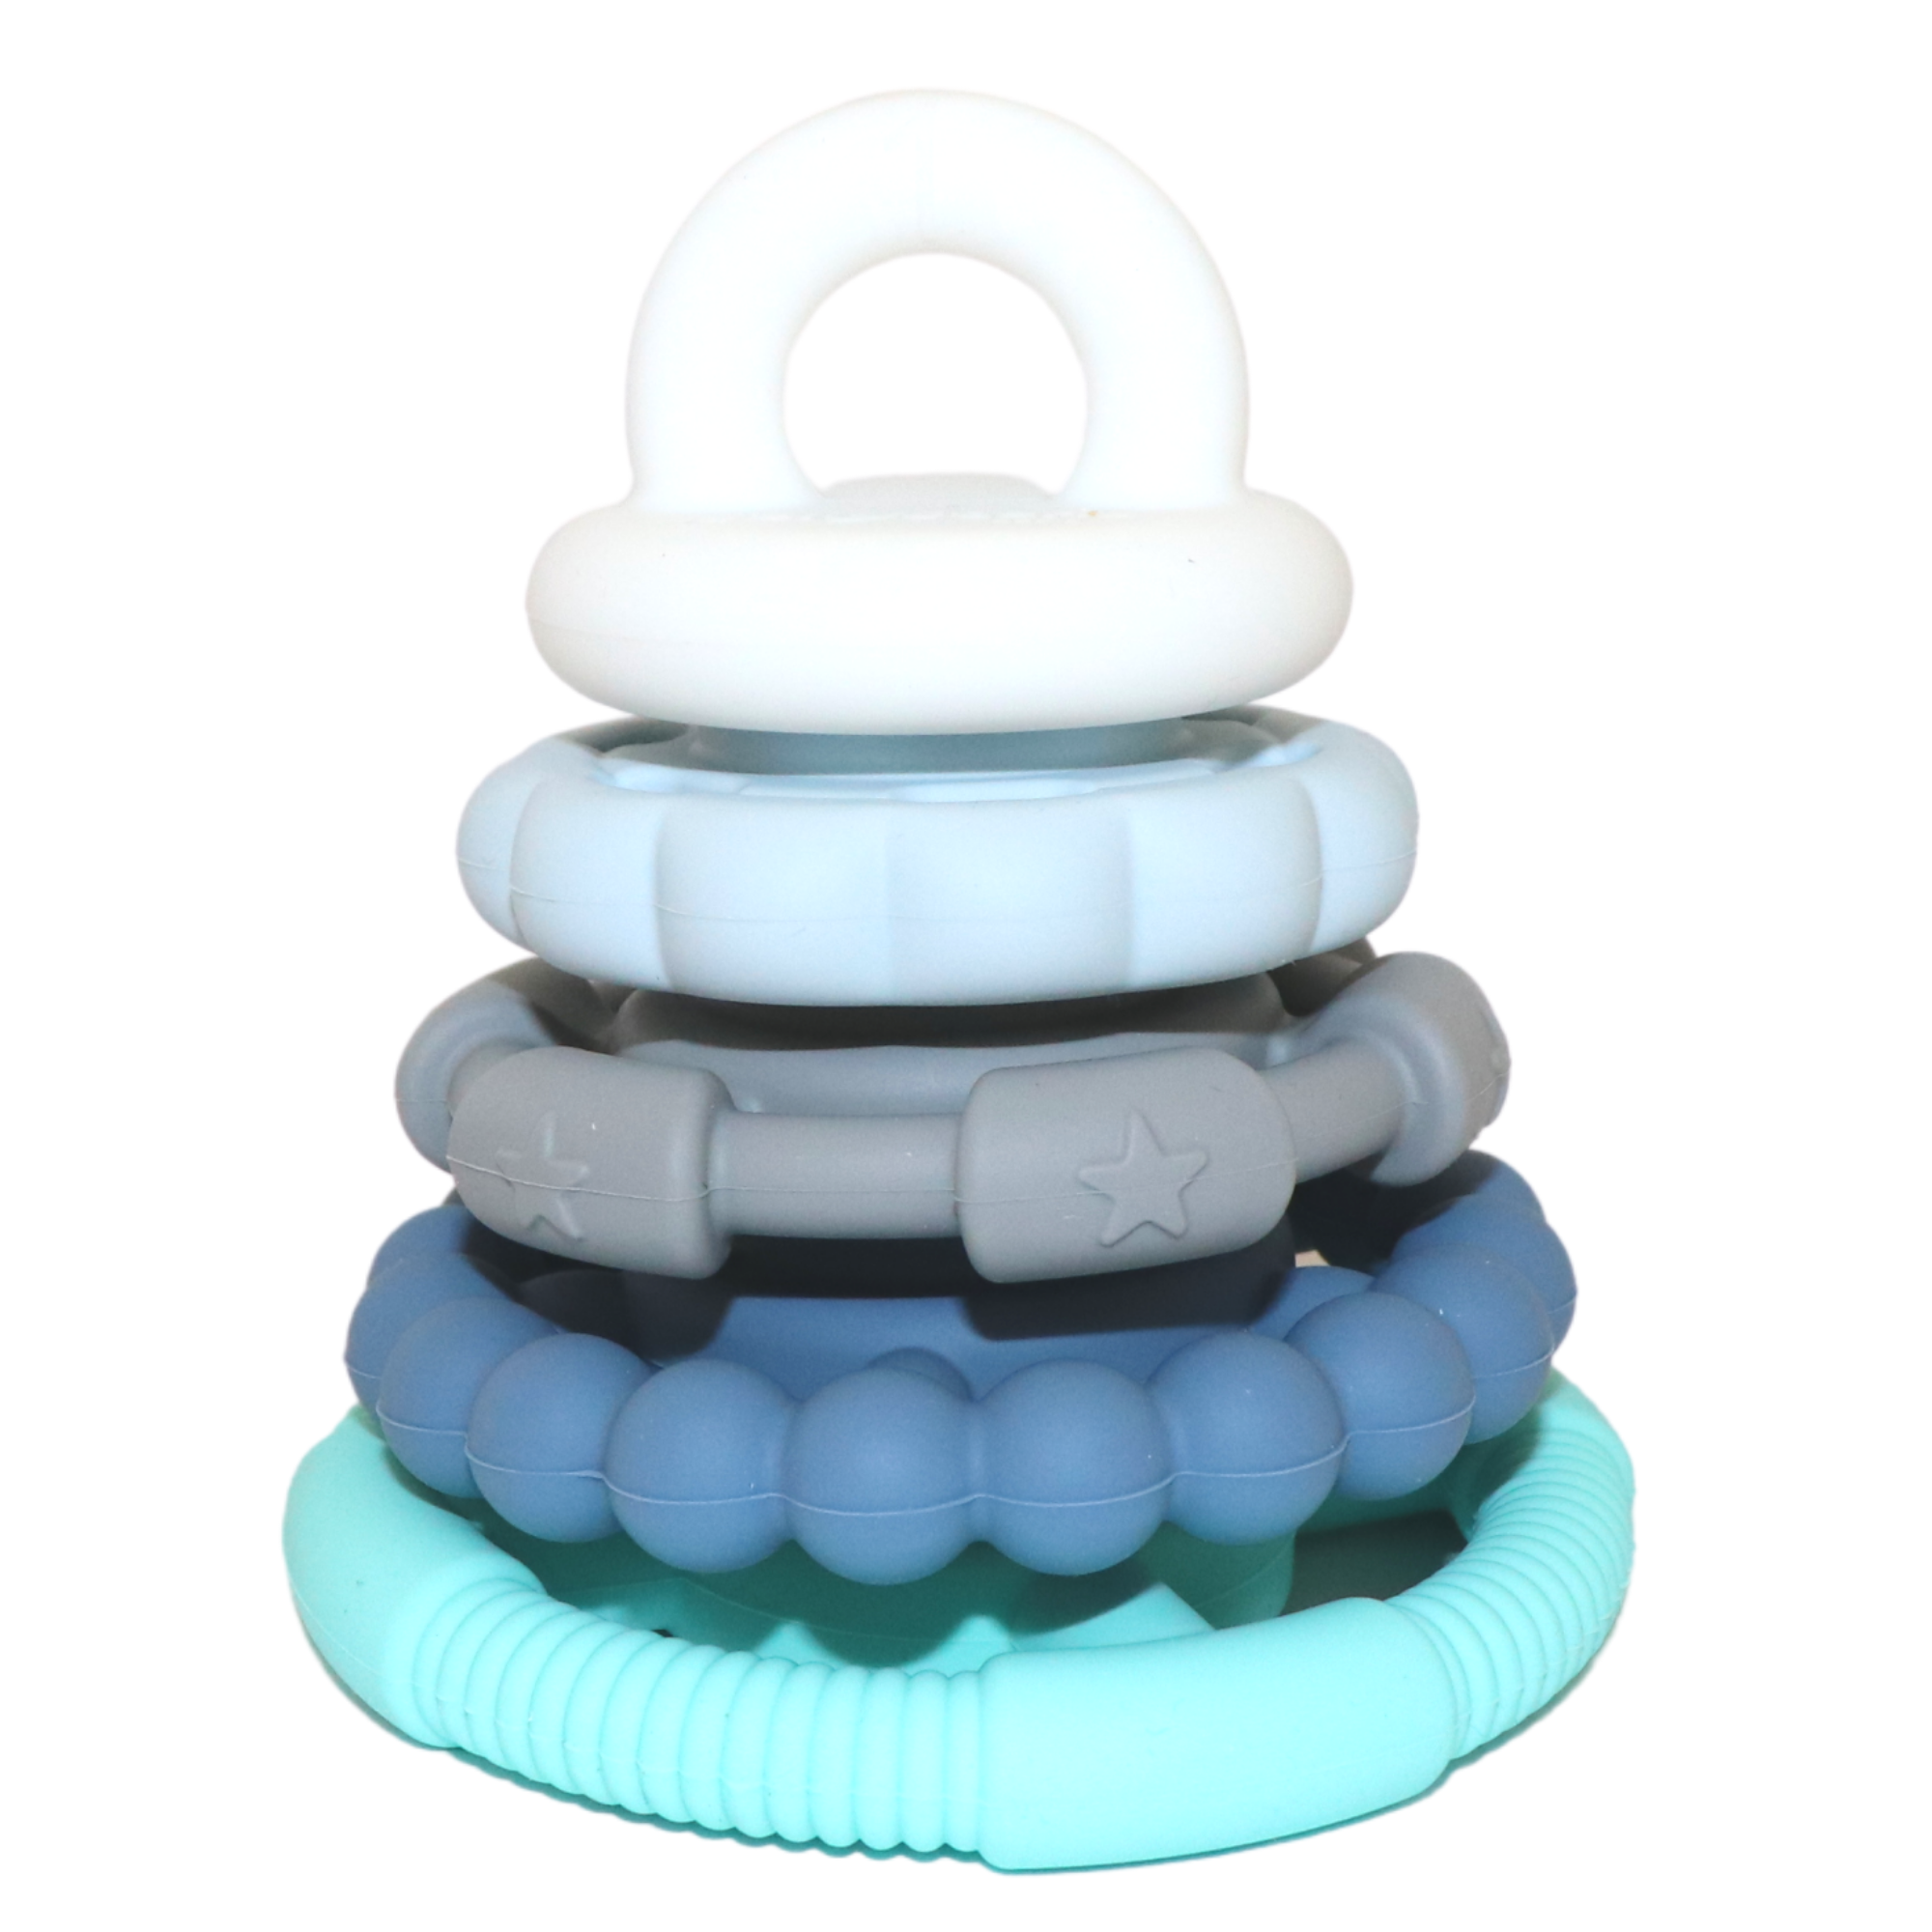 Jellystone Rainbow Stacker and Teether Toy - OCEAN